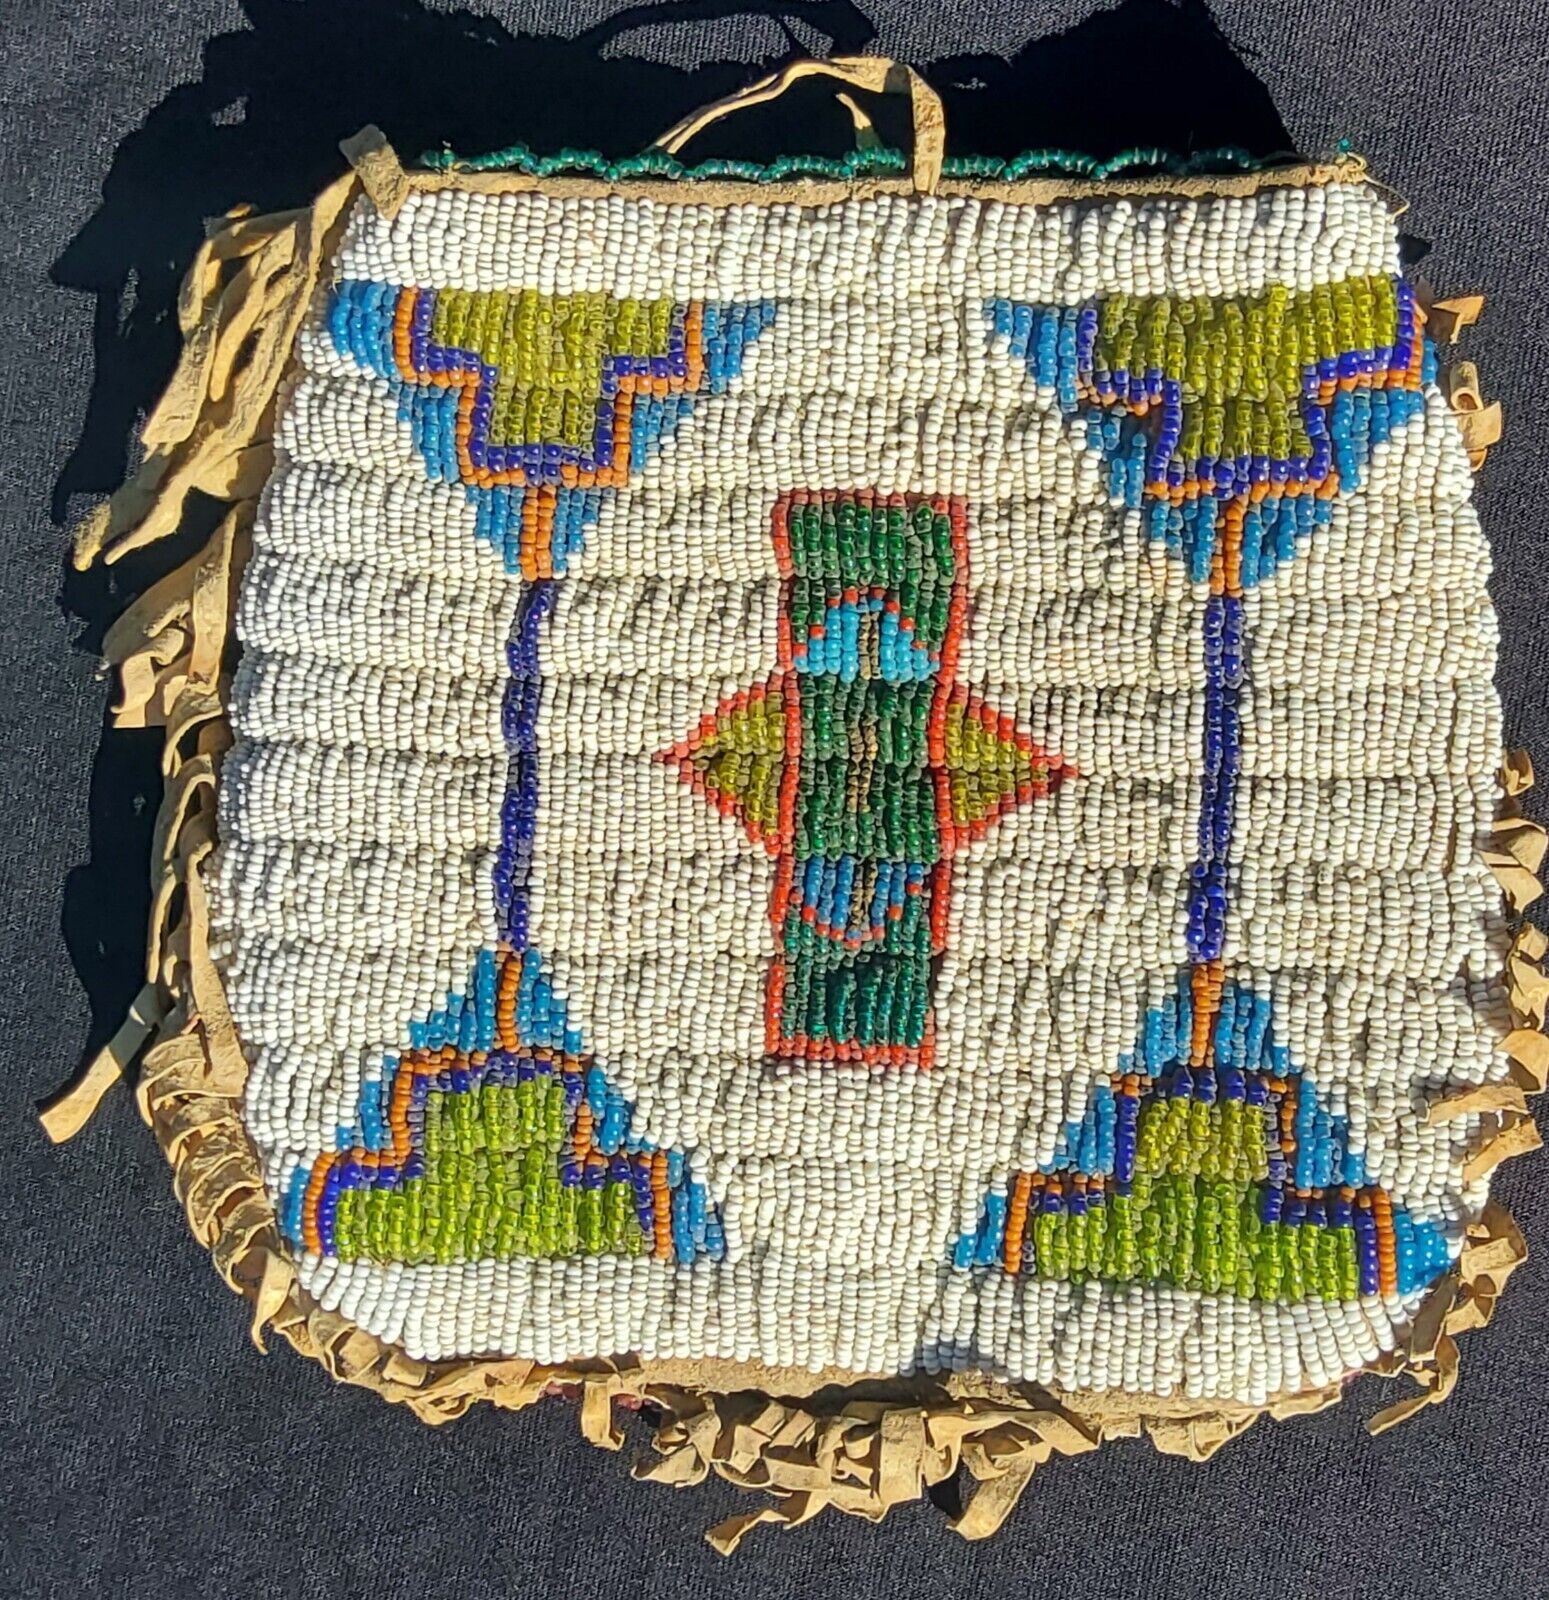 Northern Plains Native American Indian Beaded Pouch Bag